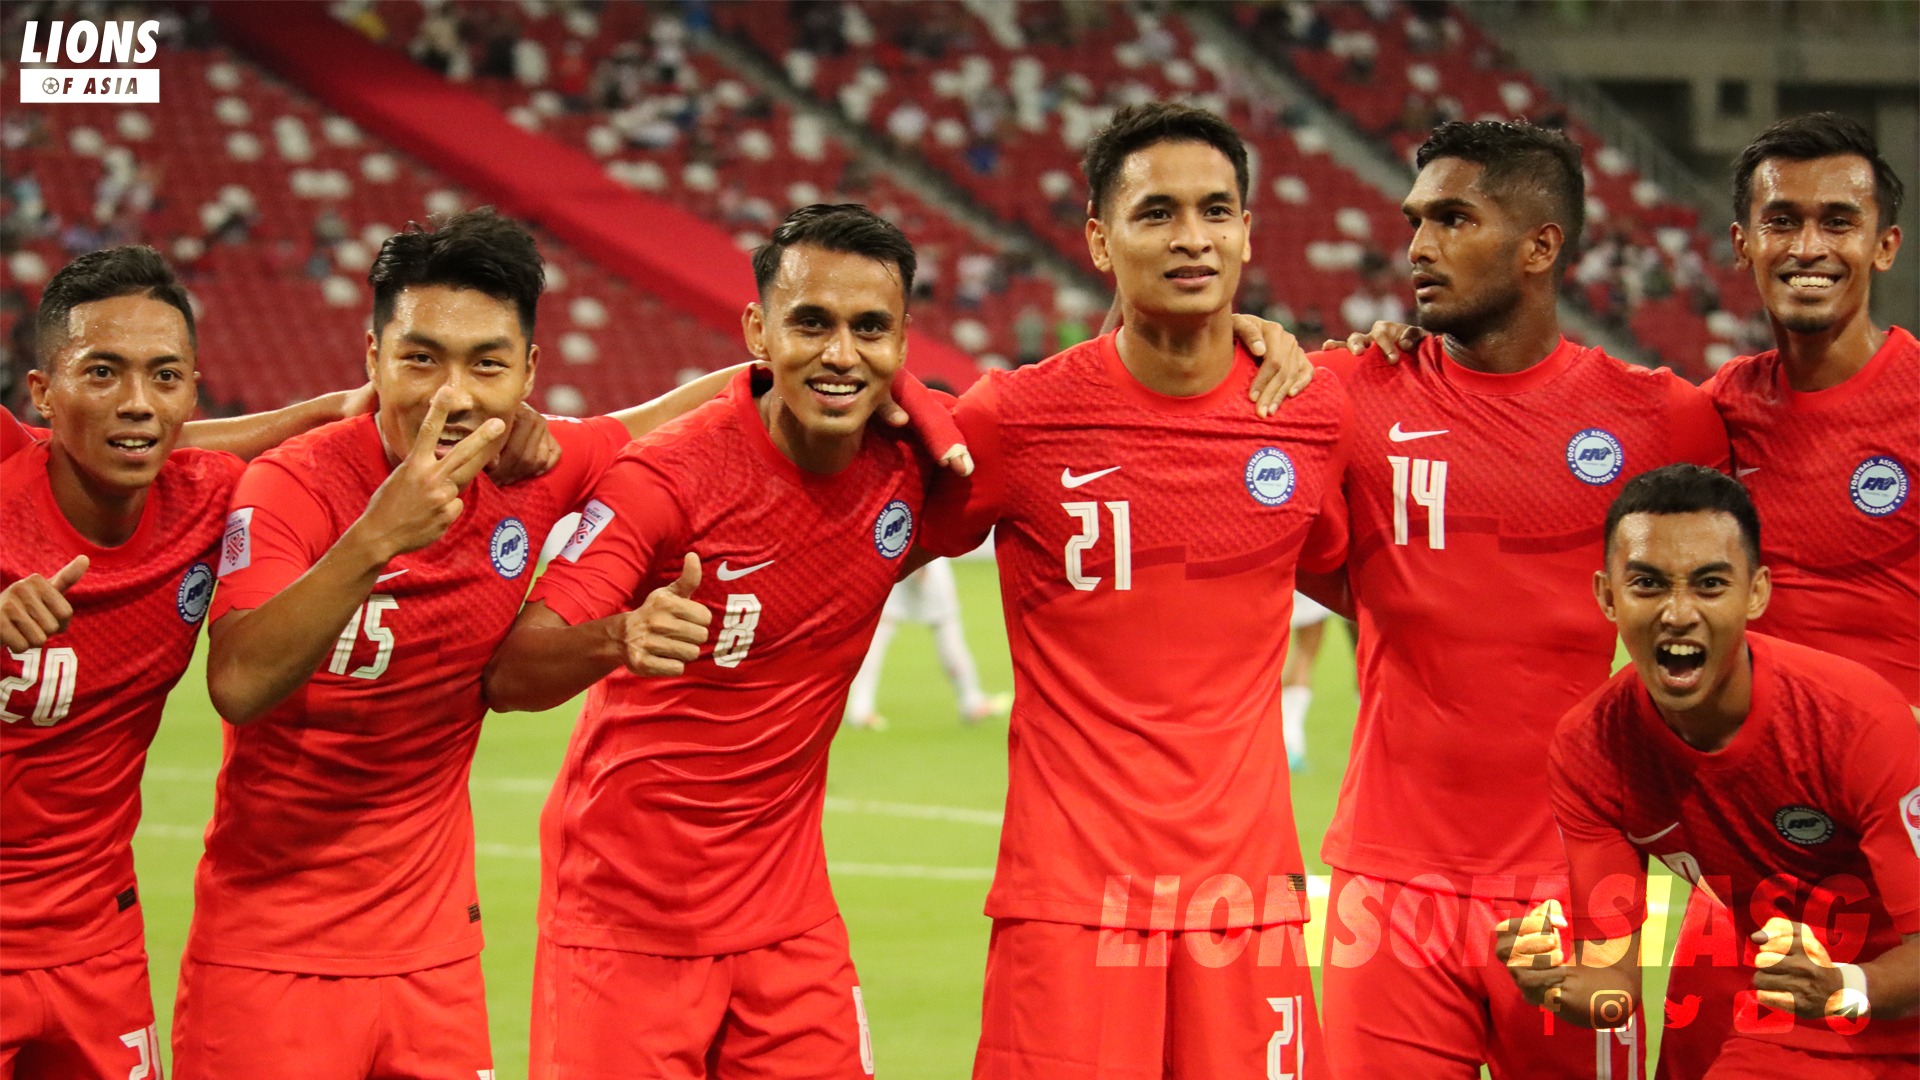 AFF Suzuki Cup 2020 : Hosts Singapore kick off tournament with comfortable 3-0 win over Myanmar!